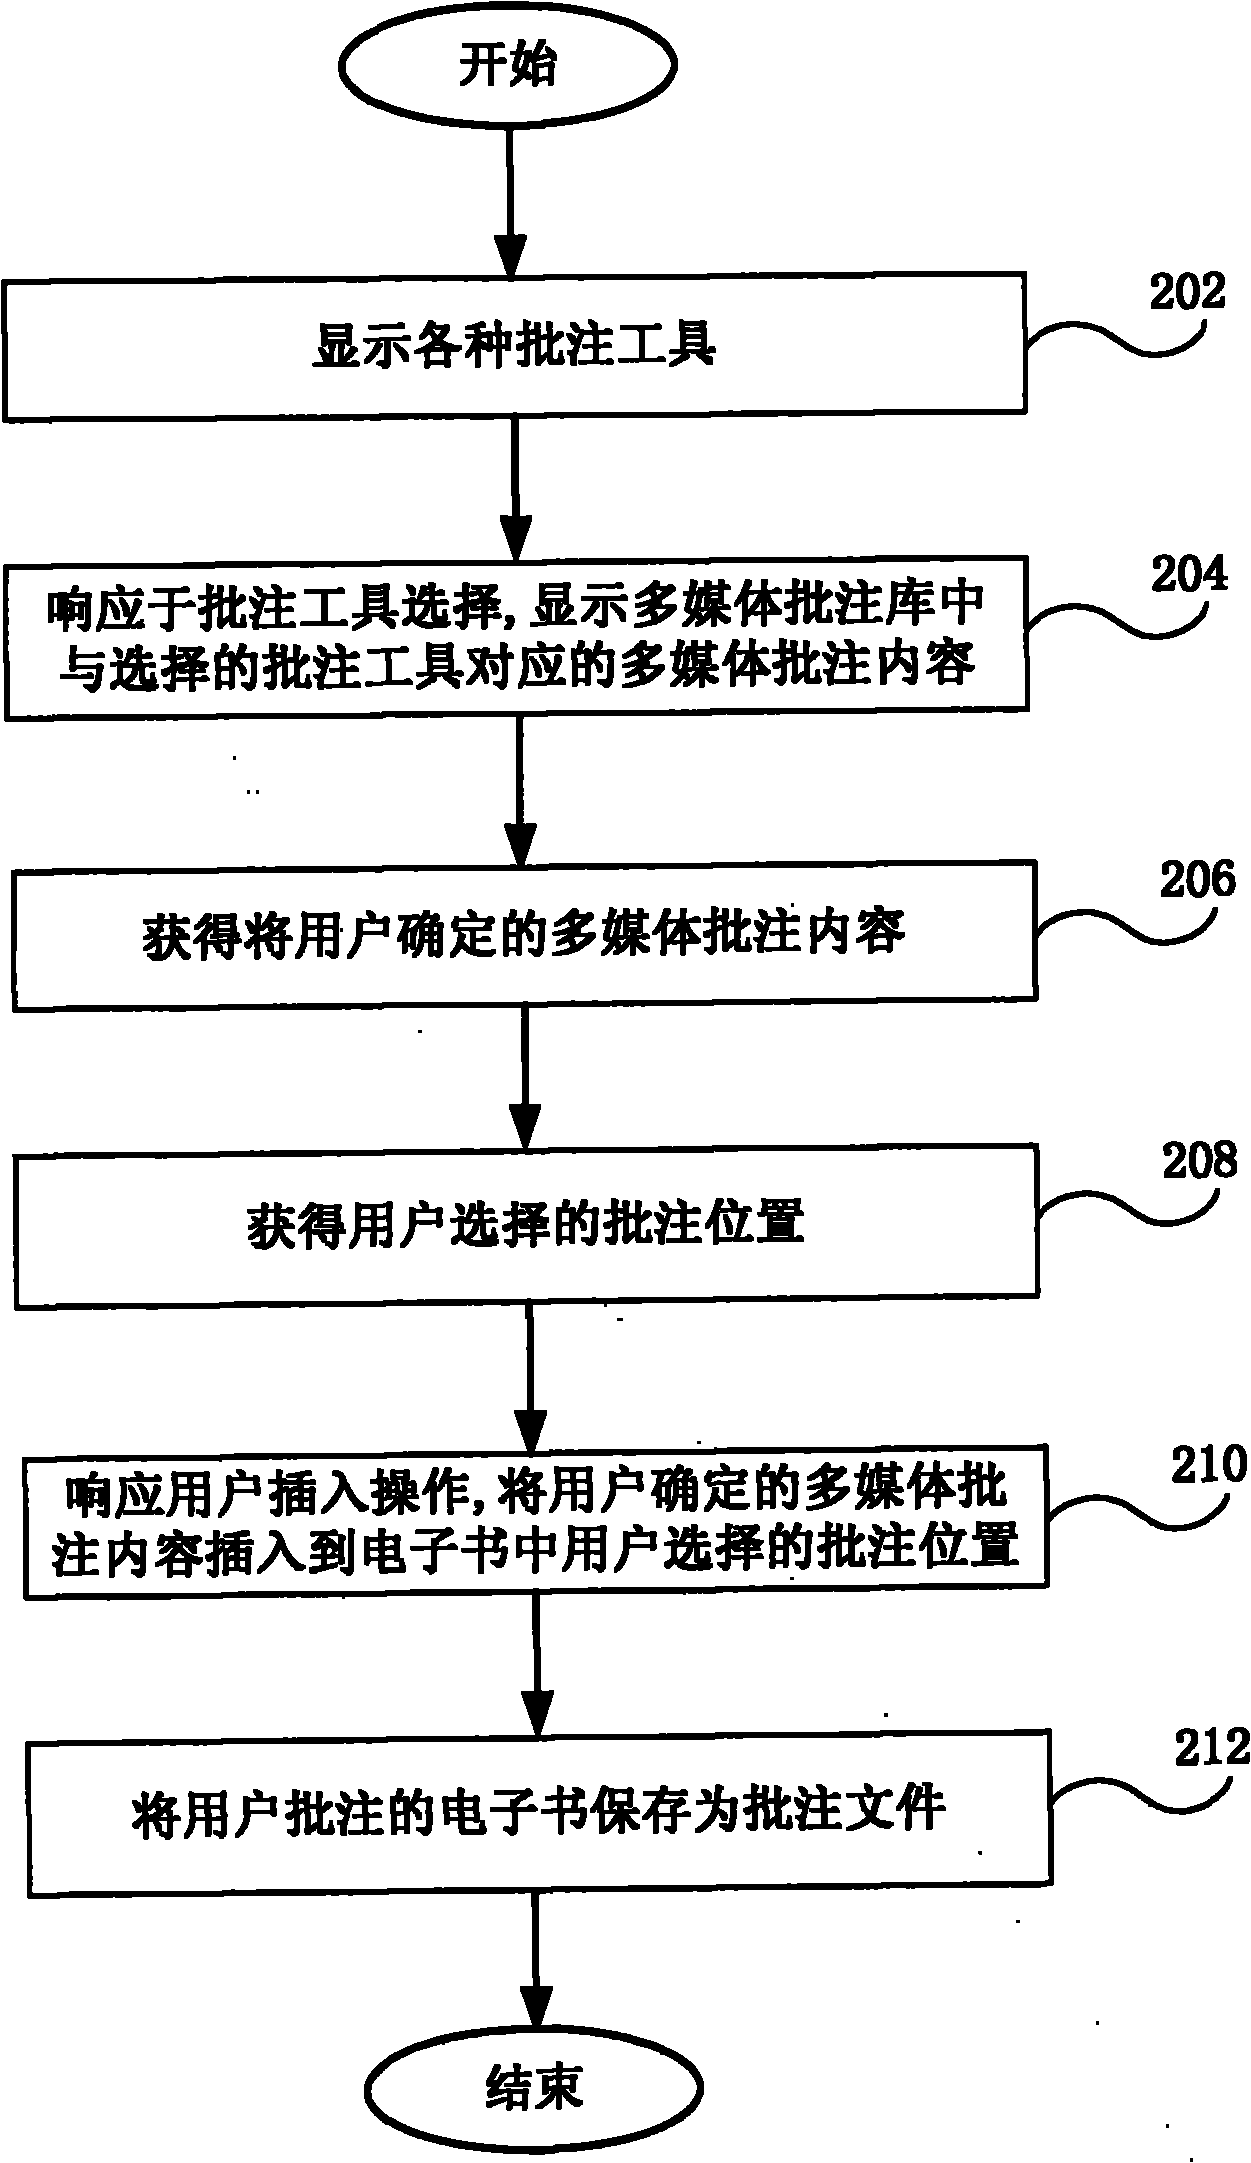 Method and device for realizing e-book annotation on electronic reader